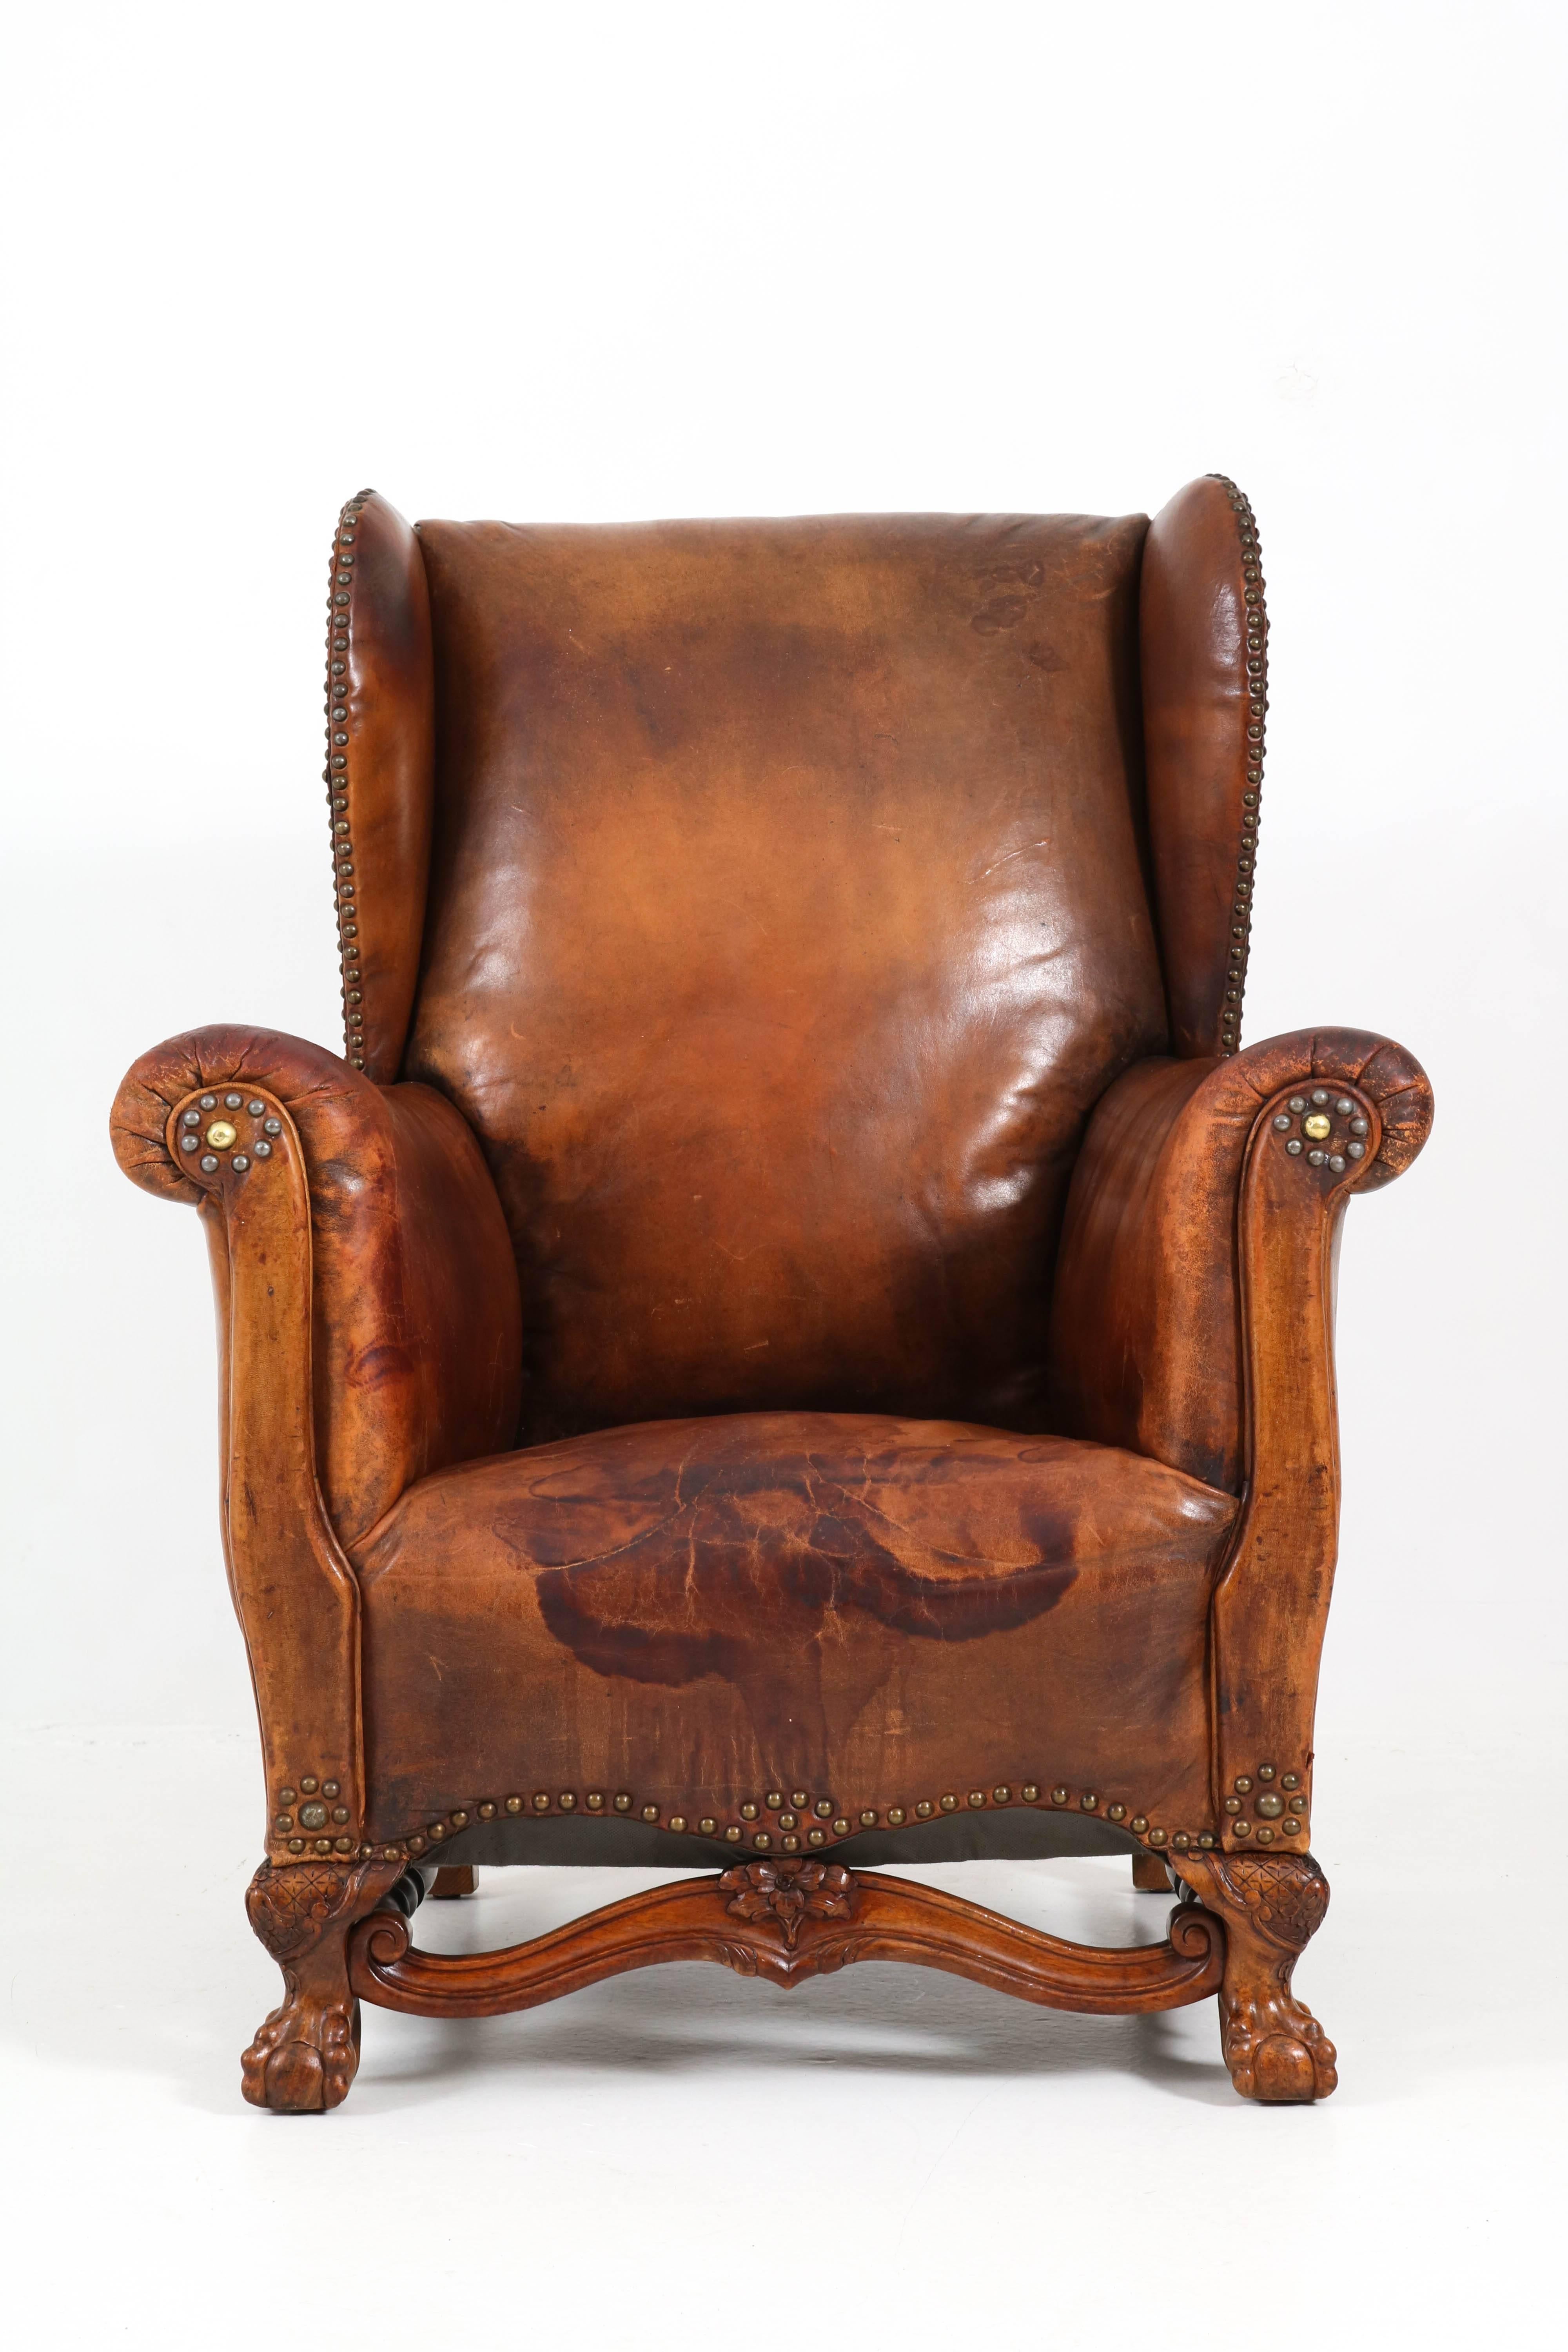 Stunning English wingback chair with wonderful patina.
Original leather upholstery on walnut Chippendale ball claw feet.
In good original condition with minor wear consistent with age and use.
   